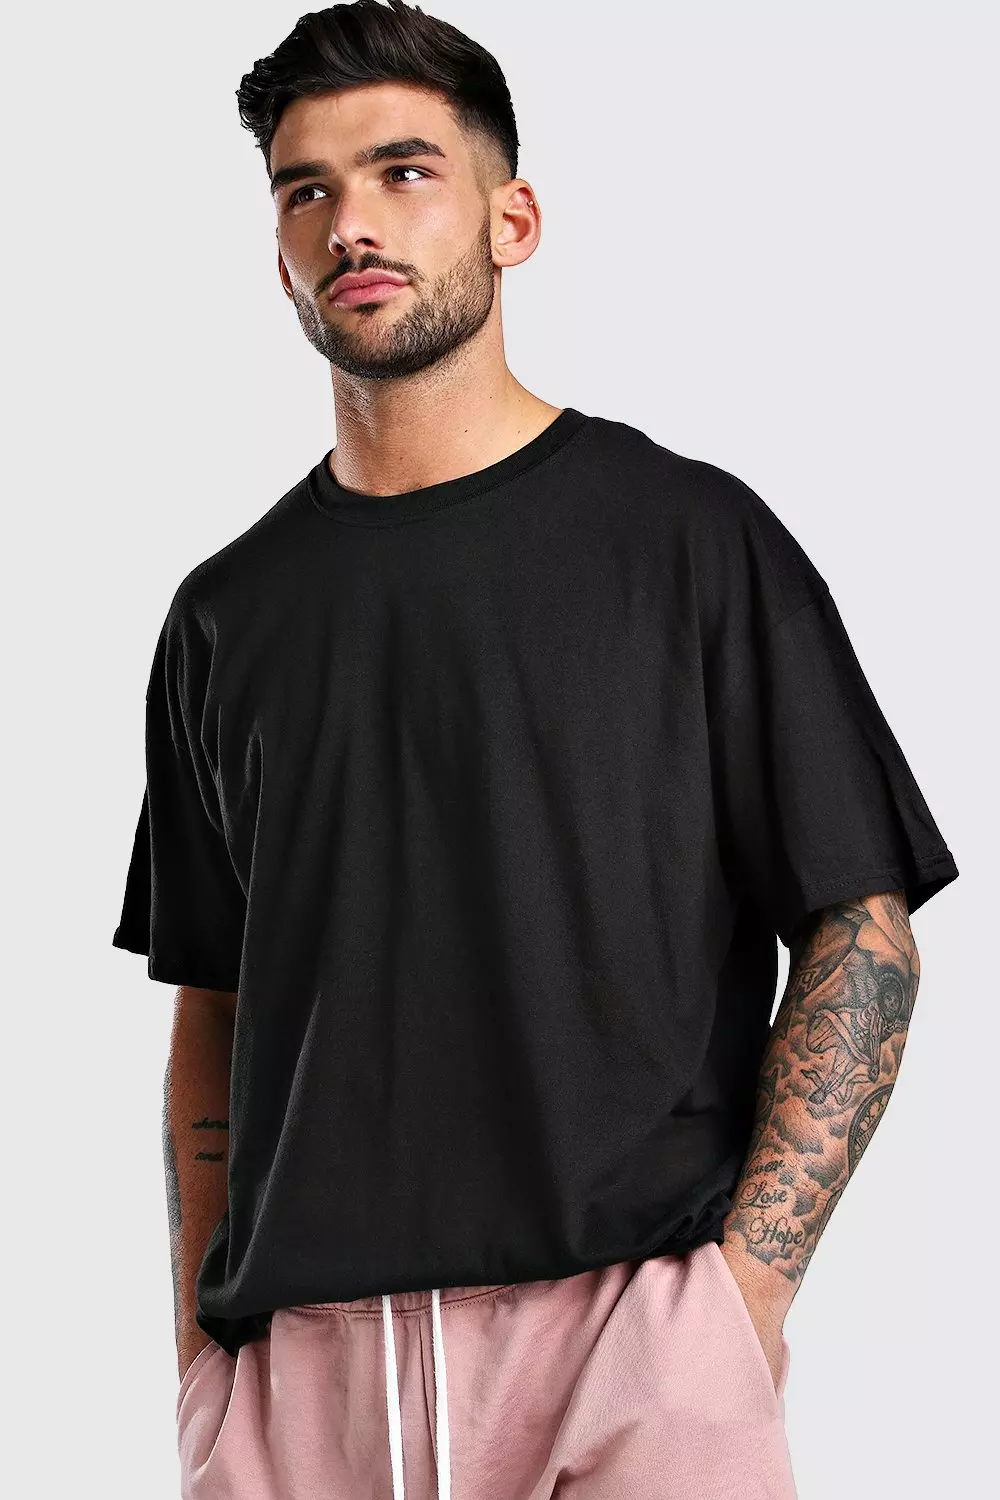 ASOS Design Oversized T-Shirt in Black with Back Los Angeles Print